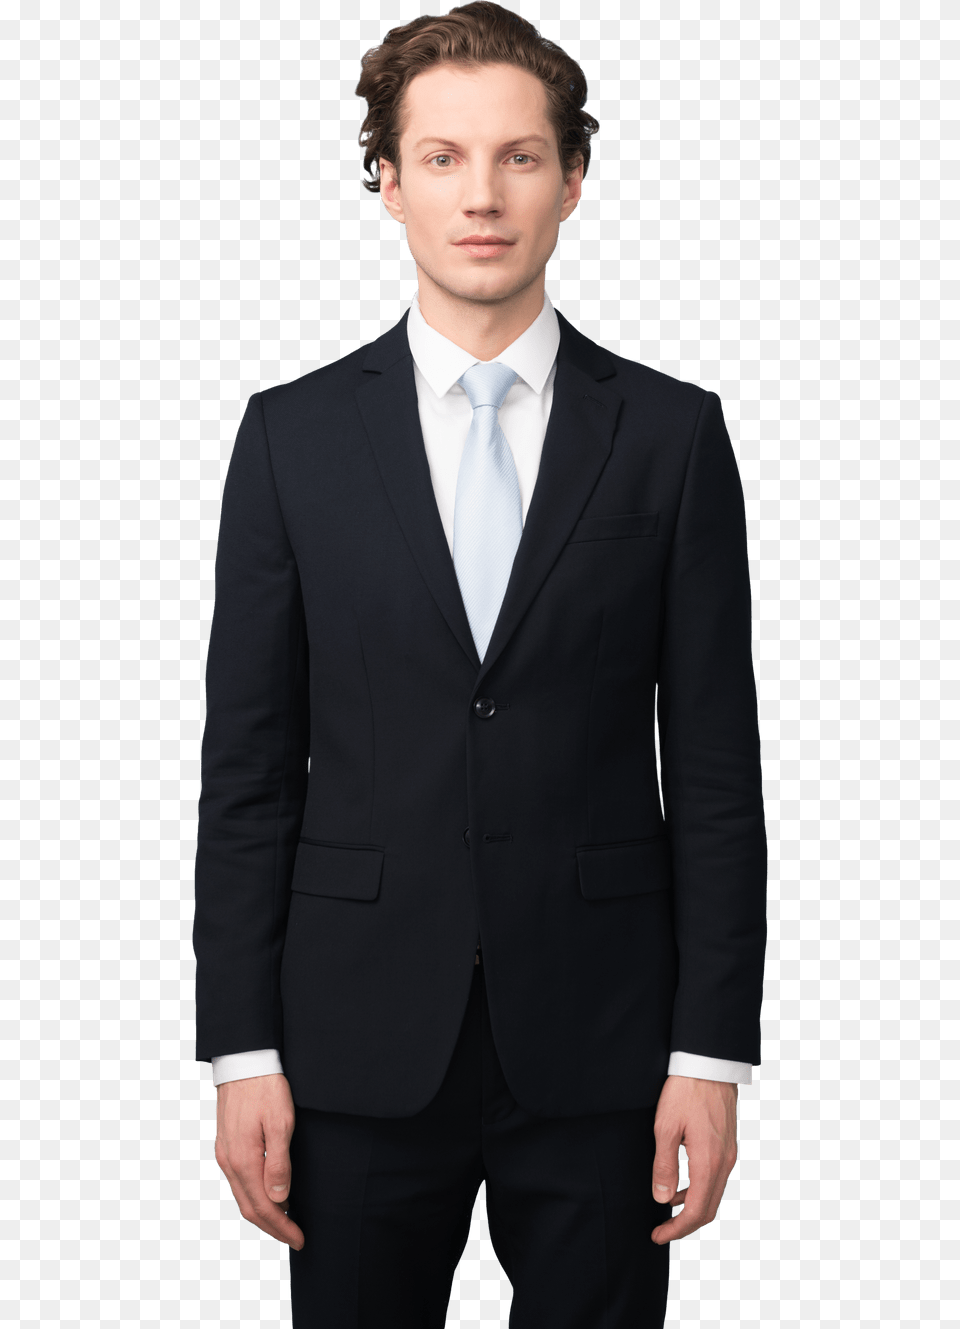 Model Suit, Tuxedo, Clothing, Formal Wear, Tie Free Transparent Png